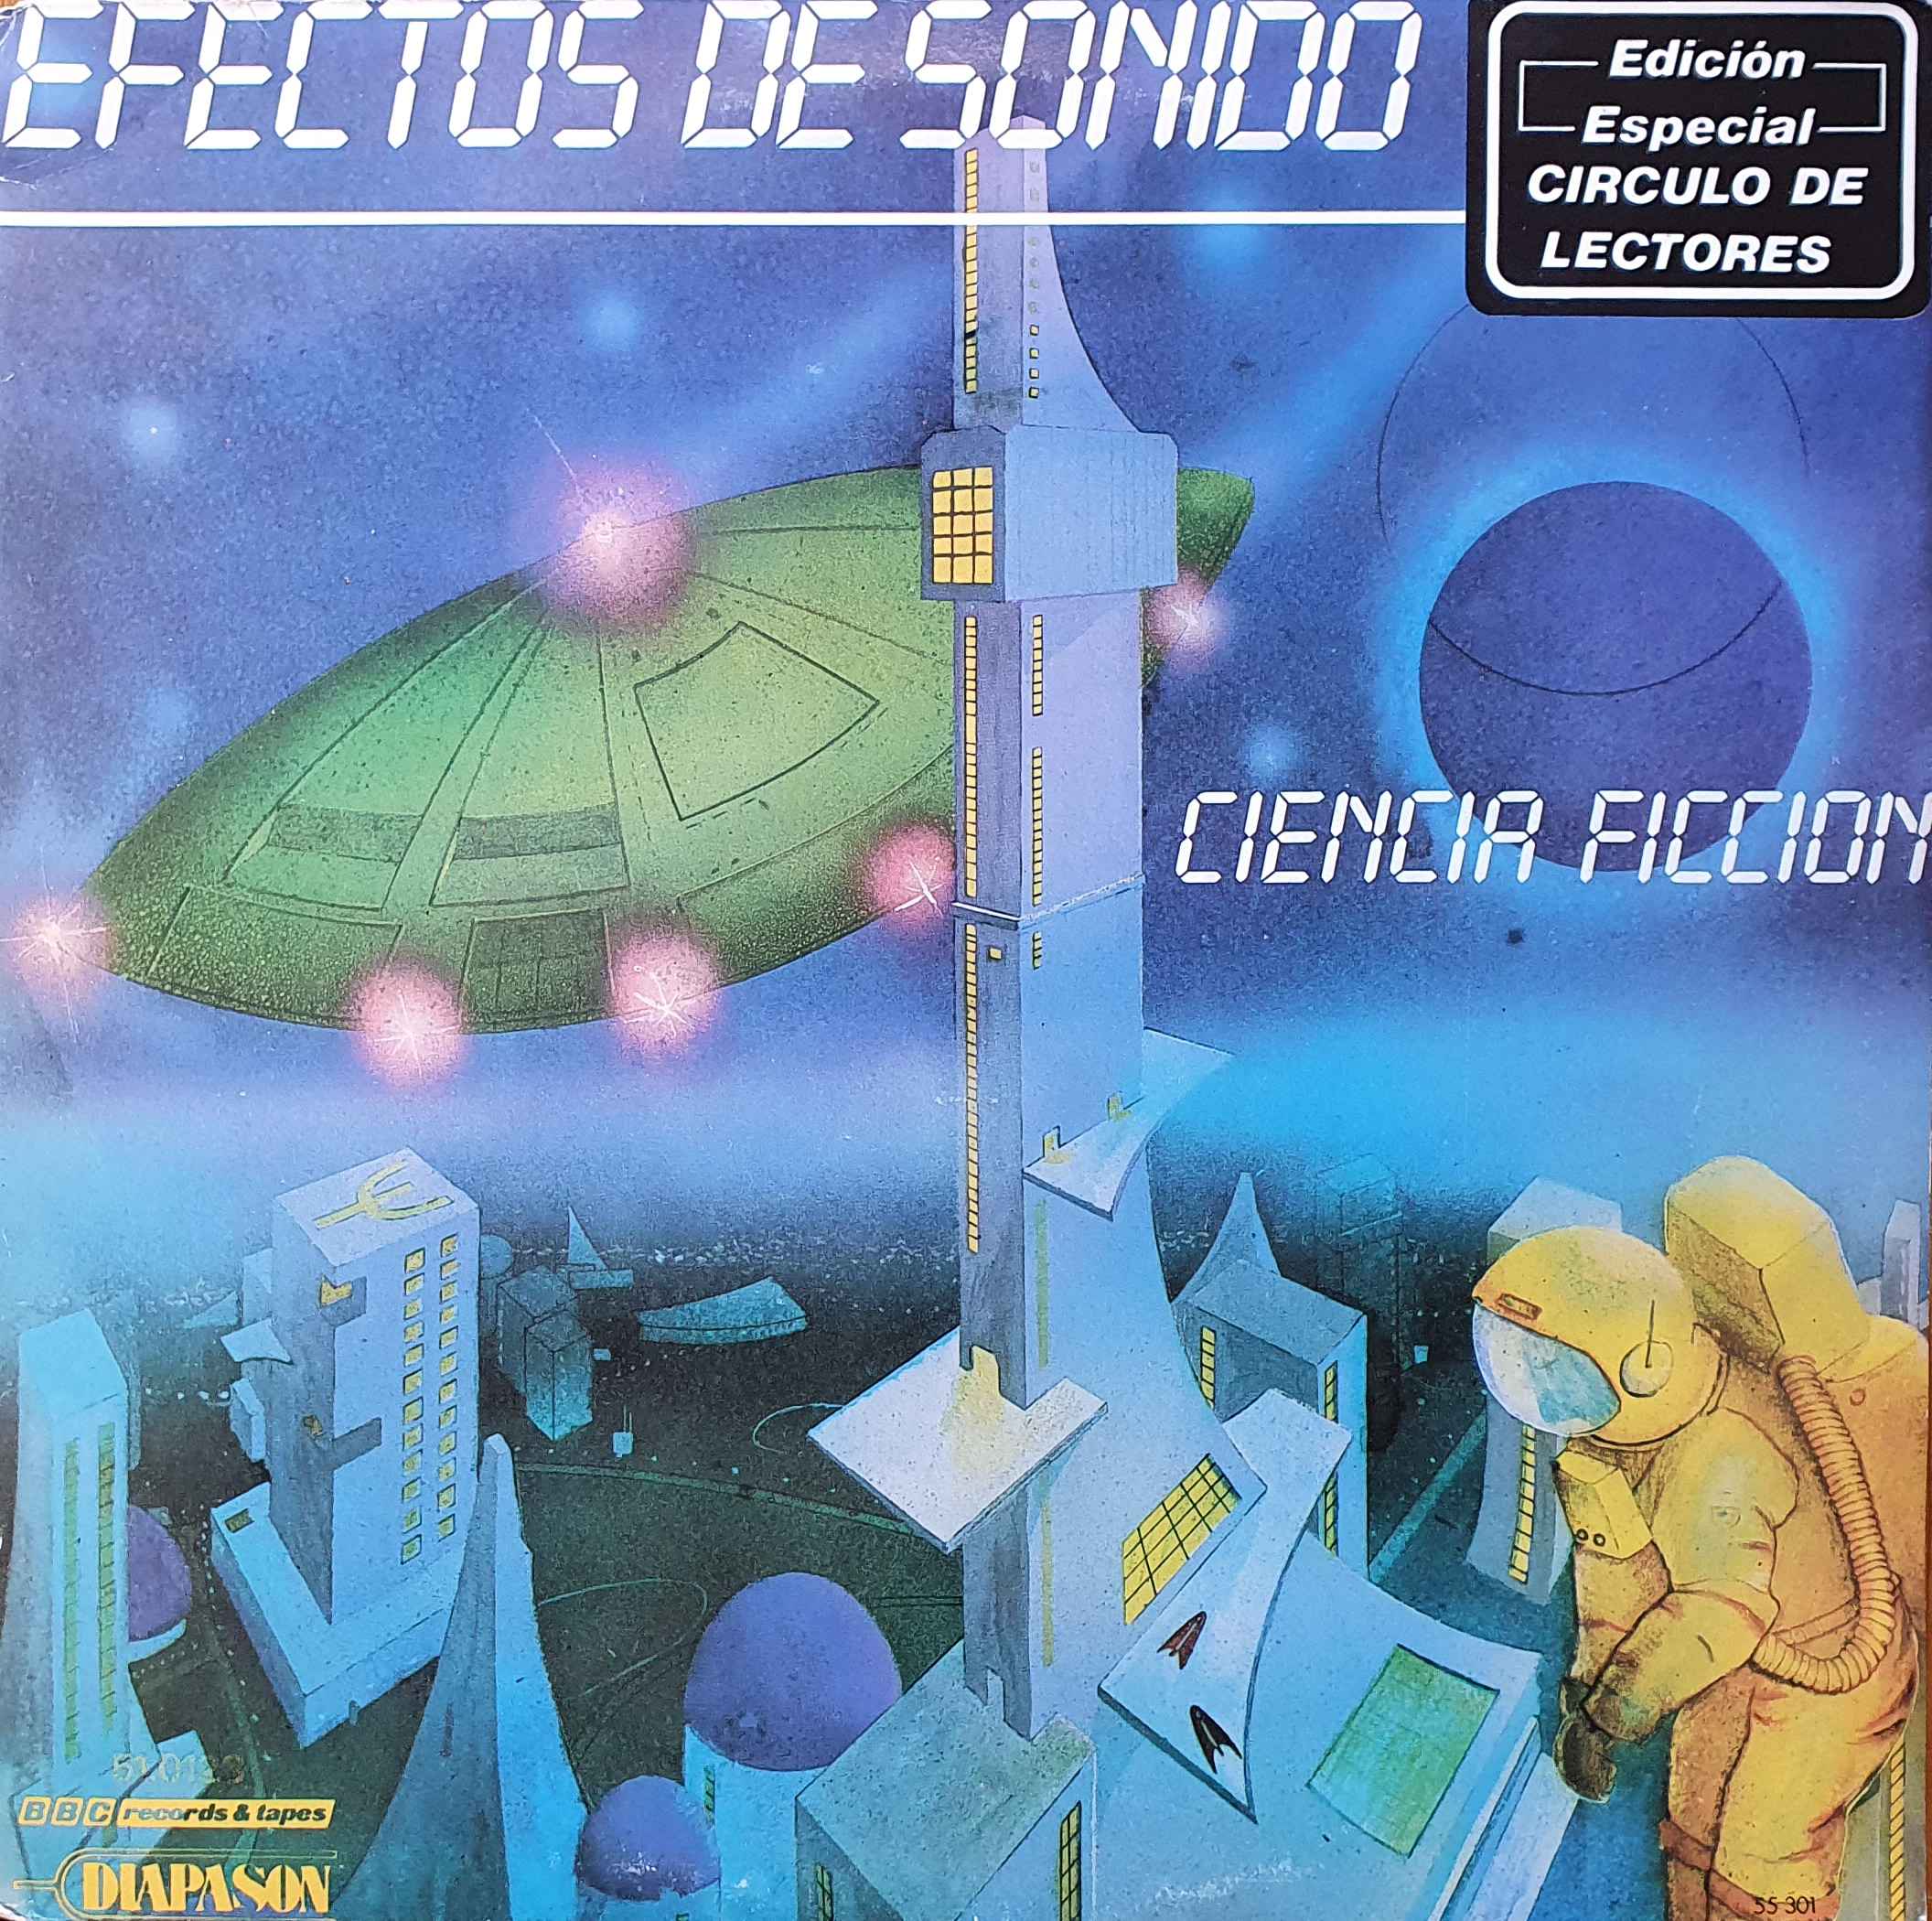 Picture of 55.301 Efectos De Sonido Ciencia Ficcion (Spanish import) by artist Various from the BBC albums - Records and Tapes library